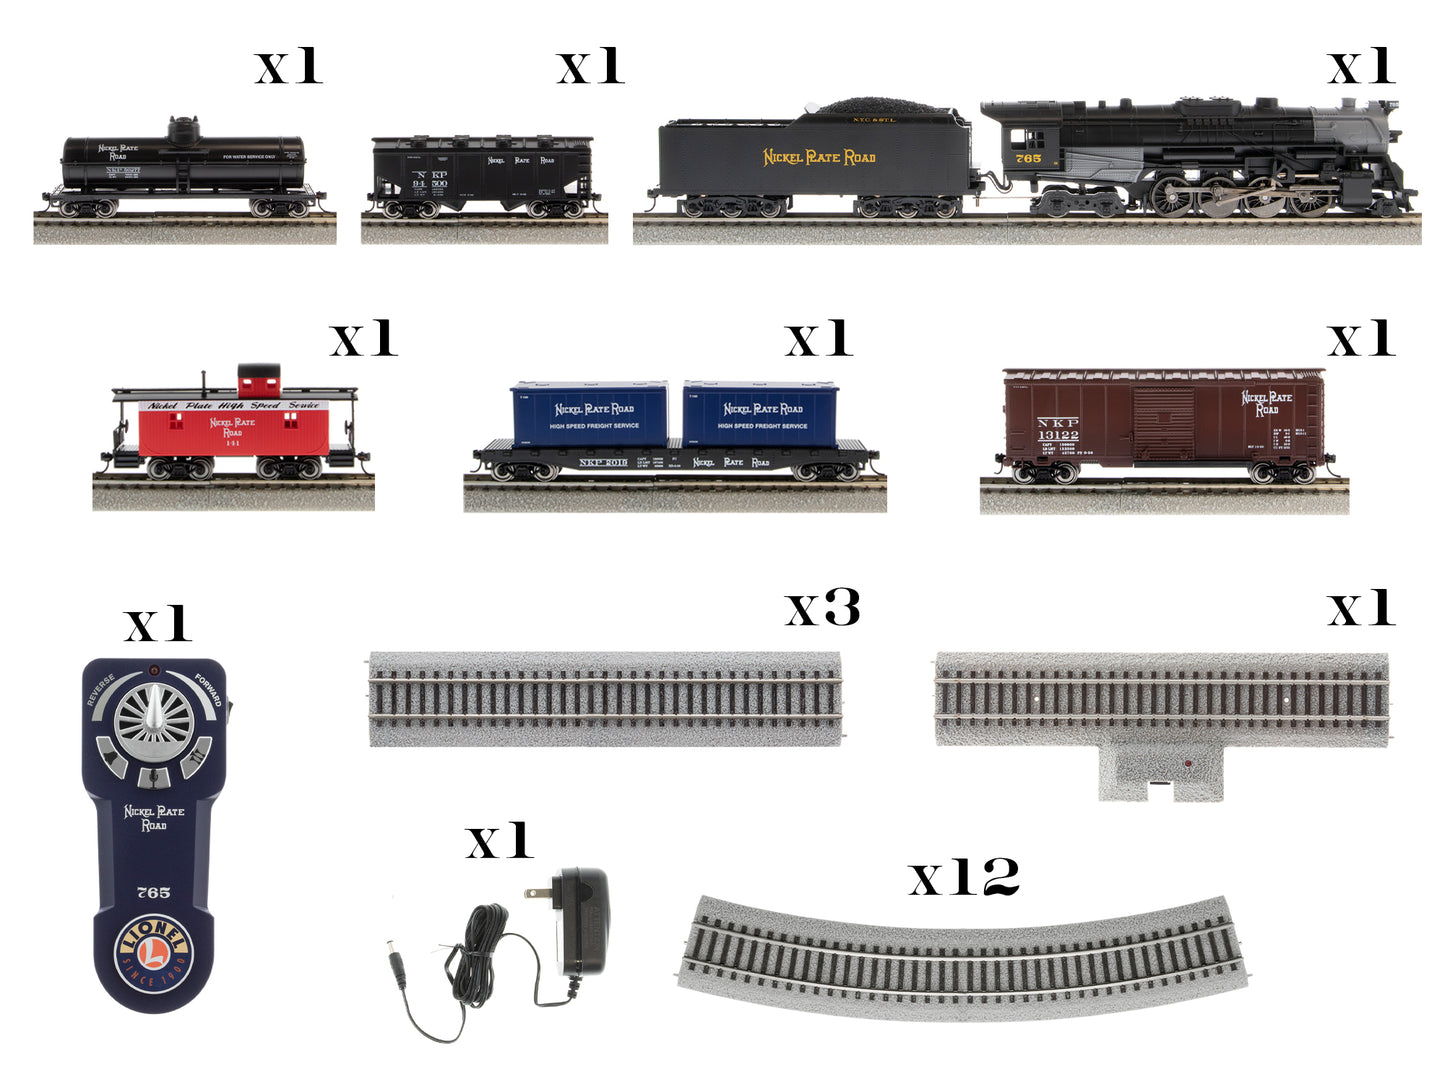 Lionel Nickel Plate Fast Freight HO Set